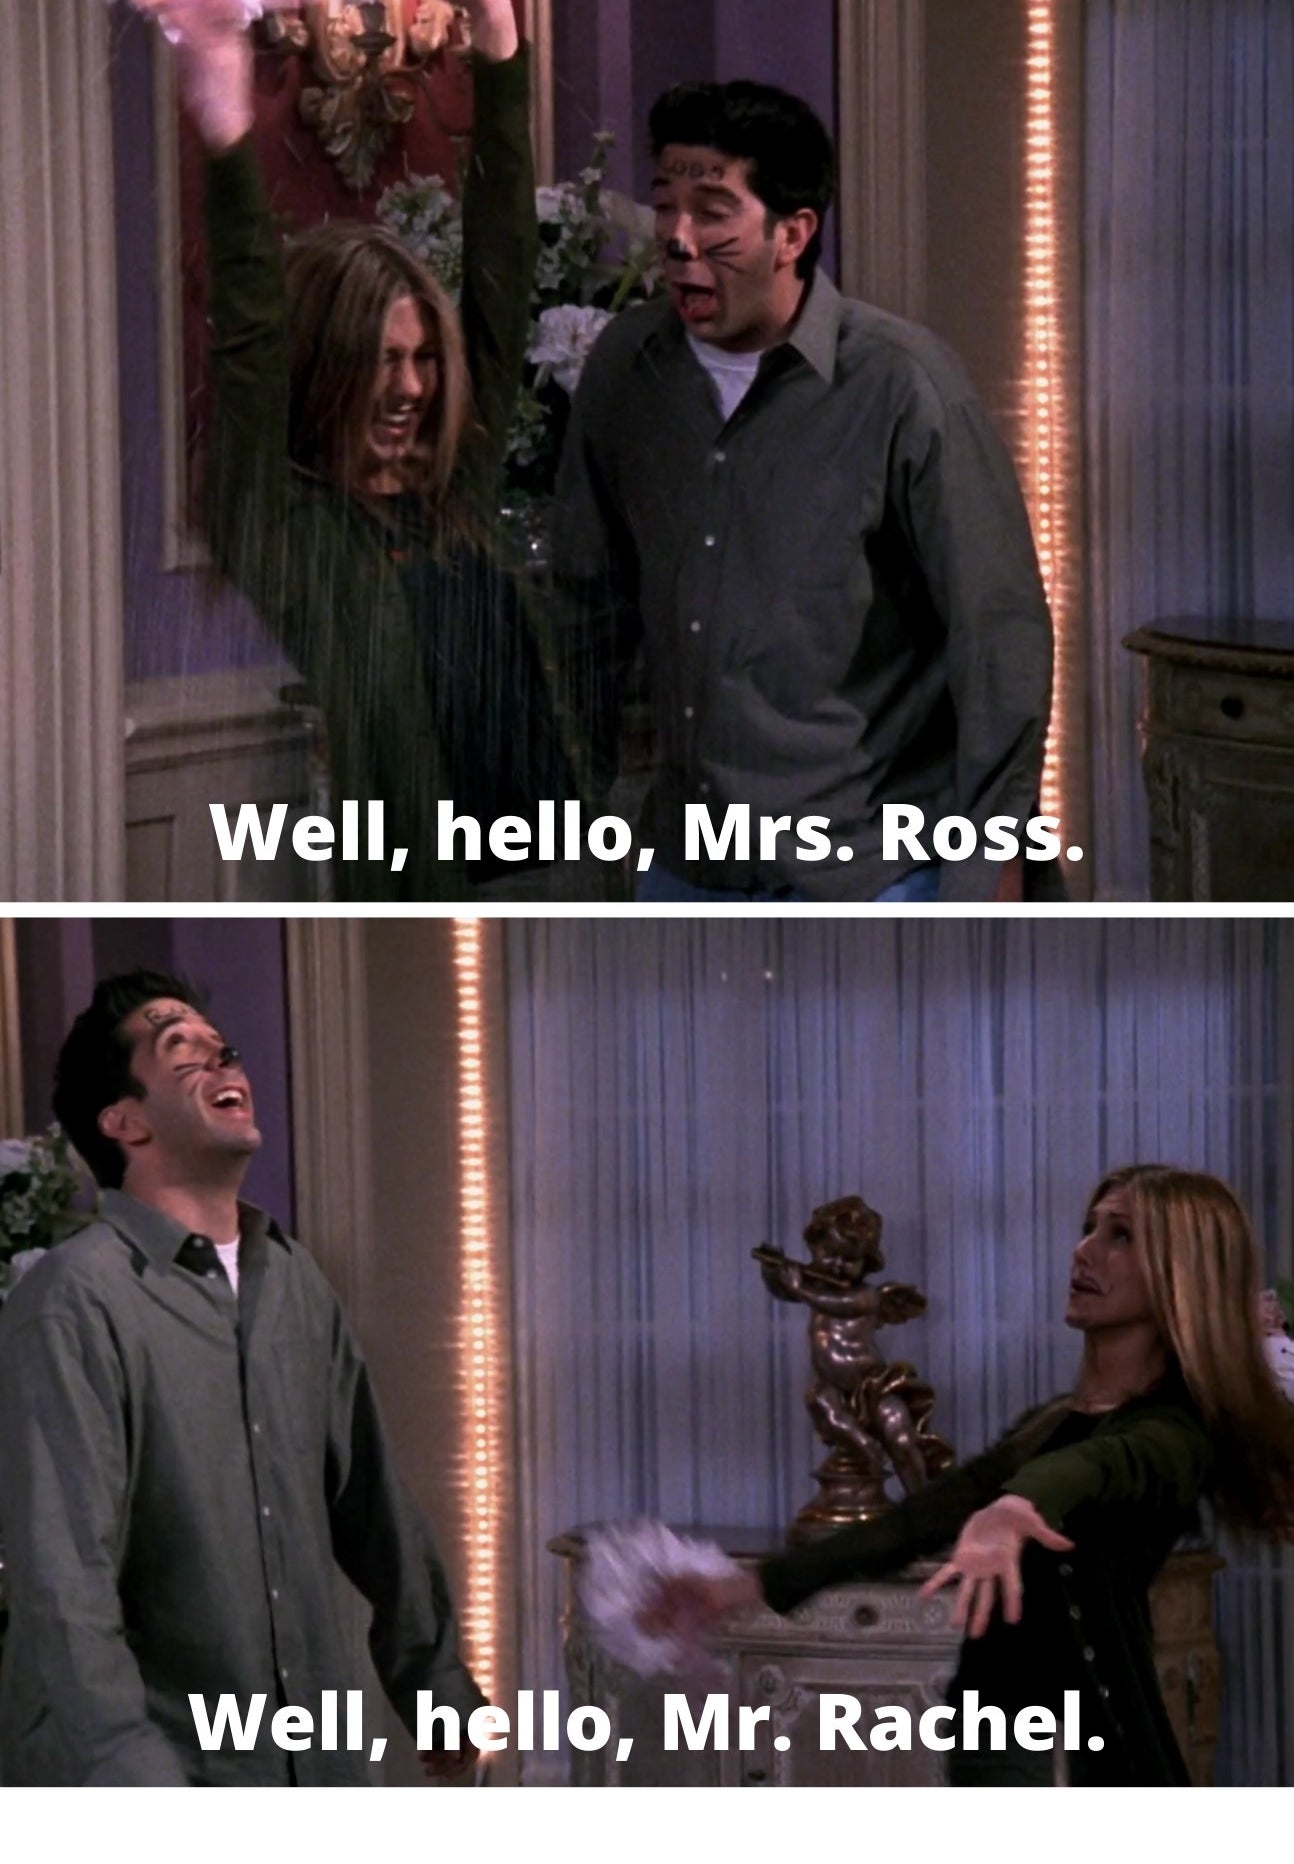 Ross saying &quot;Well, hello, Mrs. Ross while tossing rice at Rachel and Rachel saying, &quot;Well, hello, Mr. Rachel&quot; to Ross